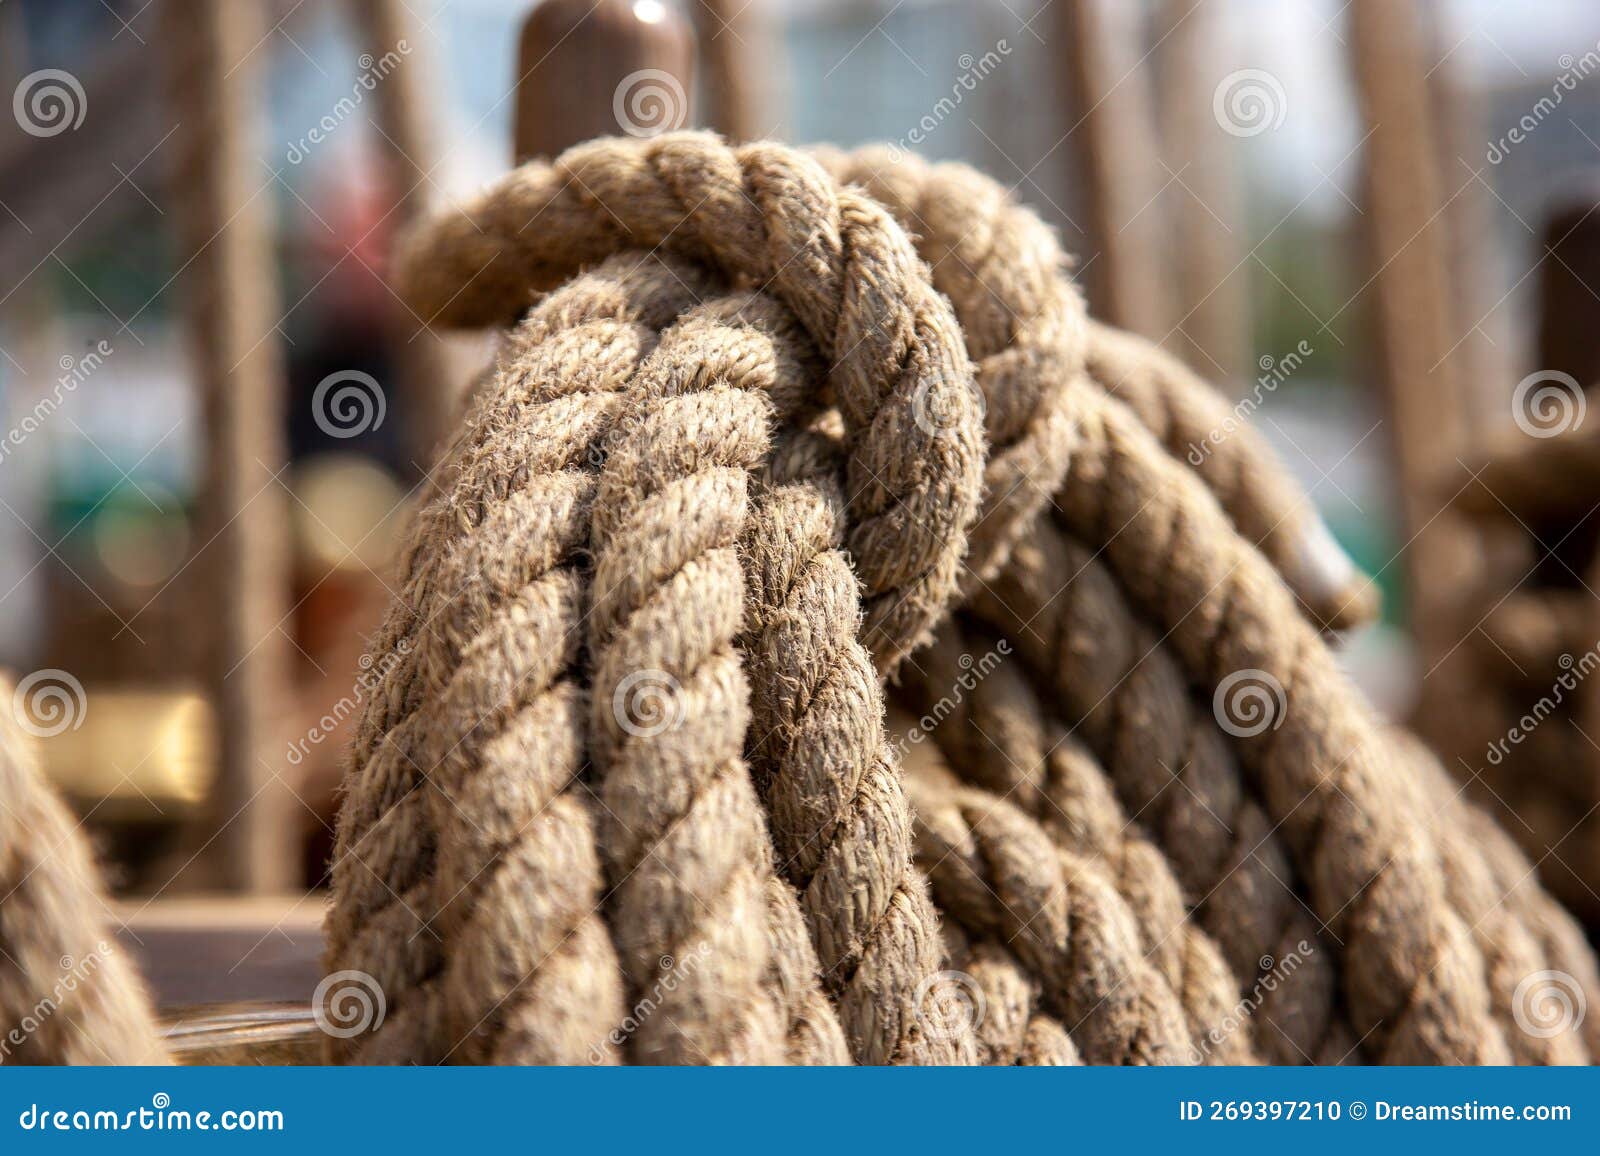 Strong Ropes for Sailing Hanging on a Wooden Pole Stock Photo